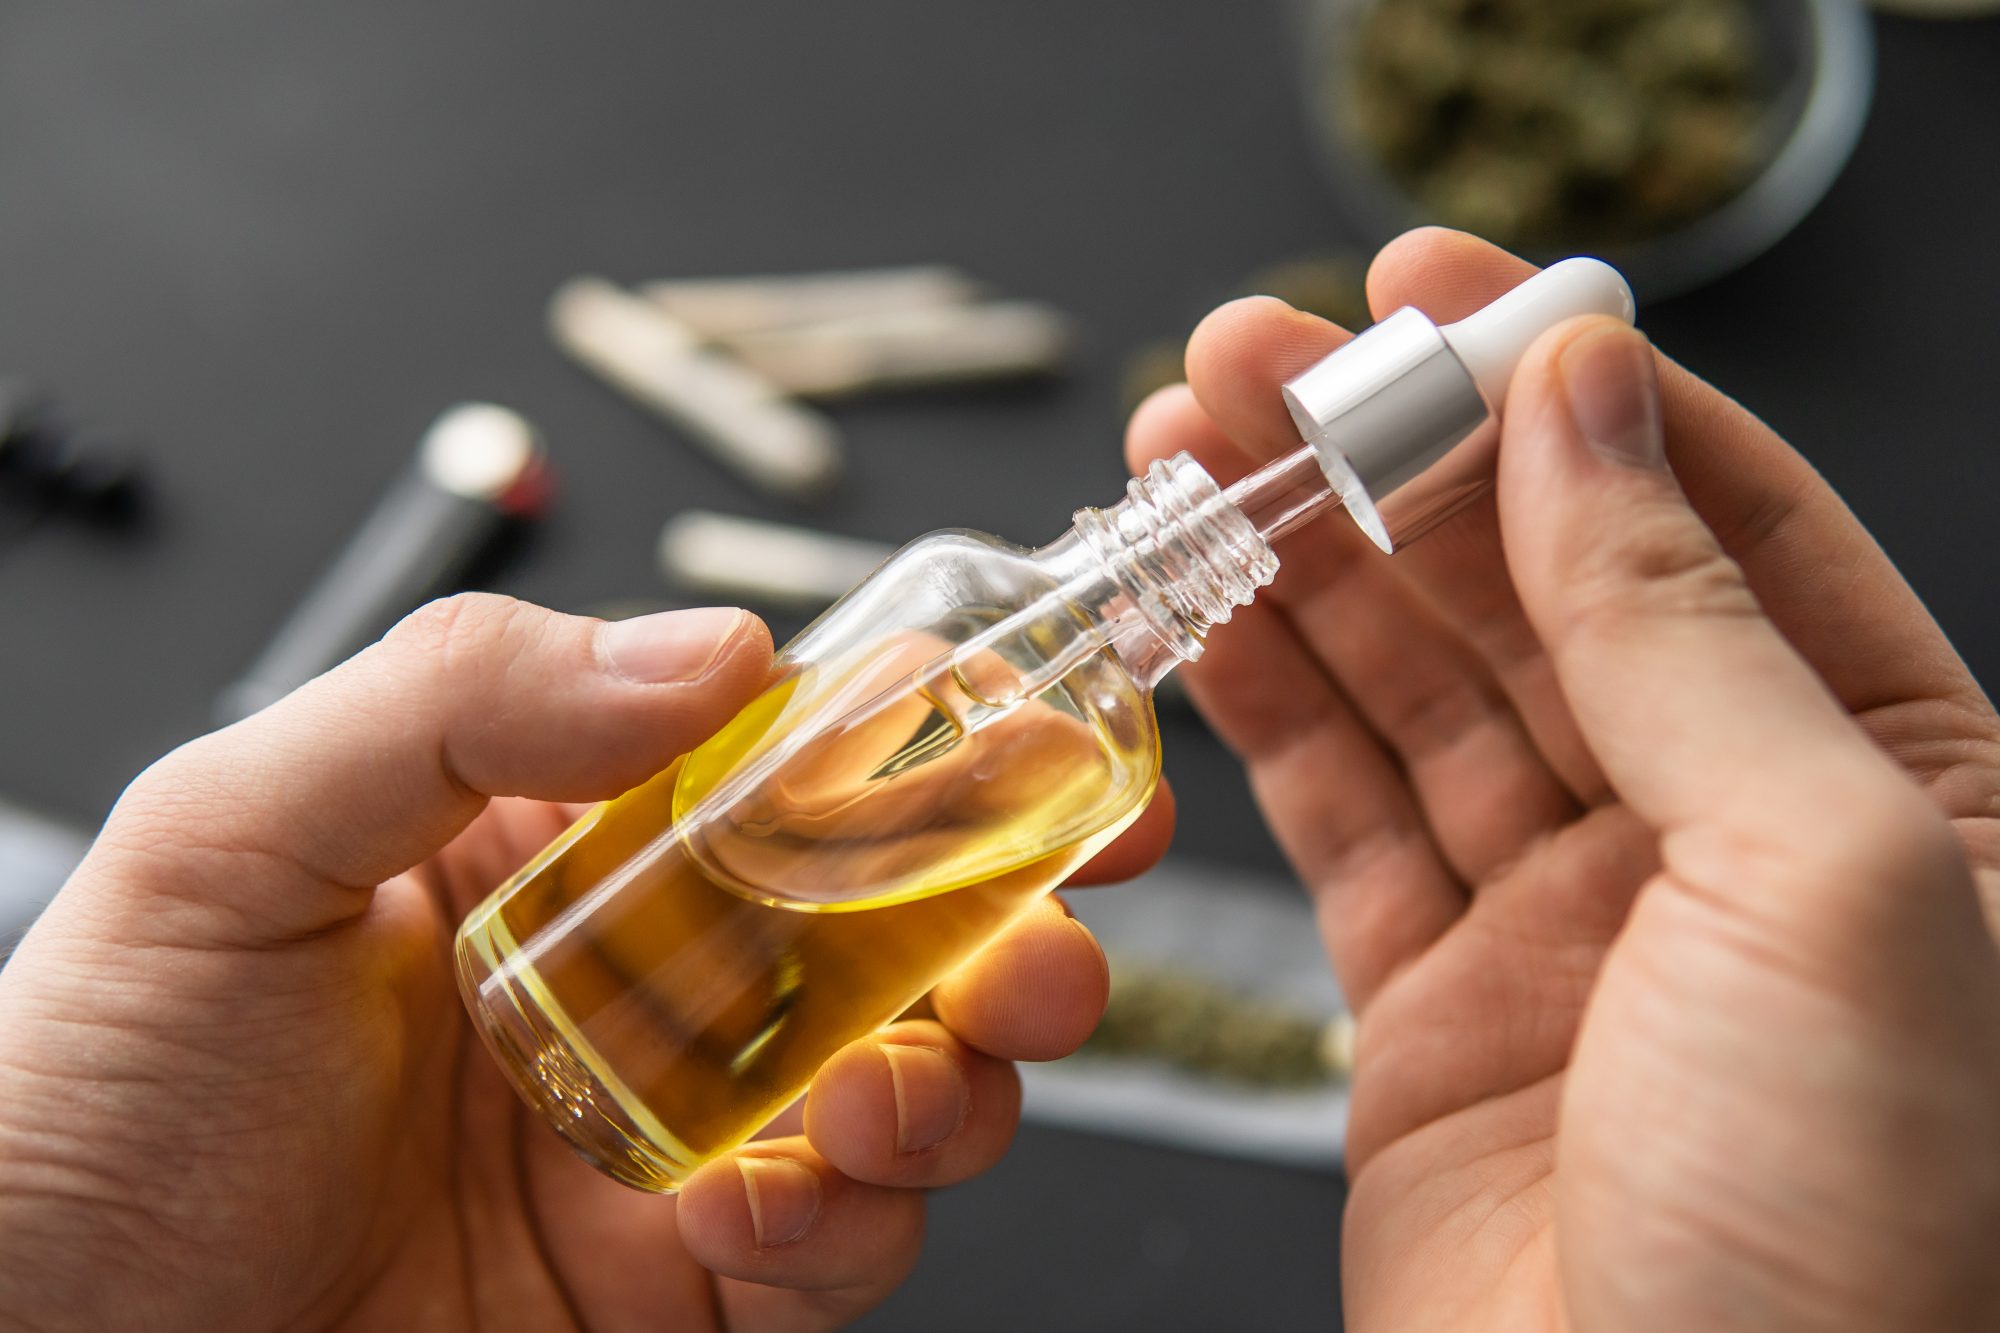 The Use of CBD Oil to Treat Epilepsy and Other Diseases